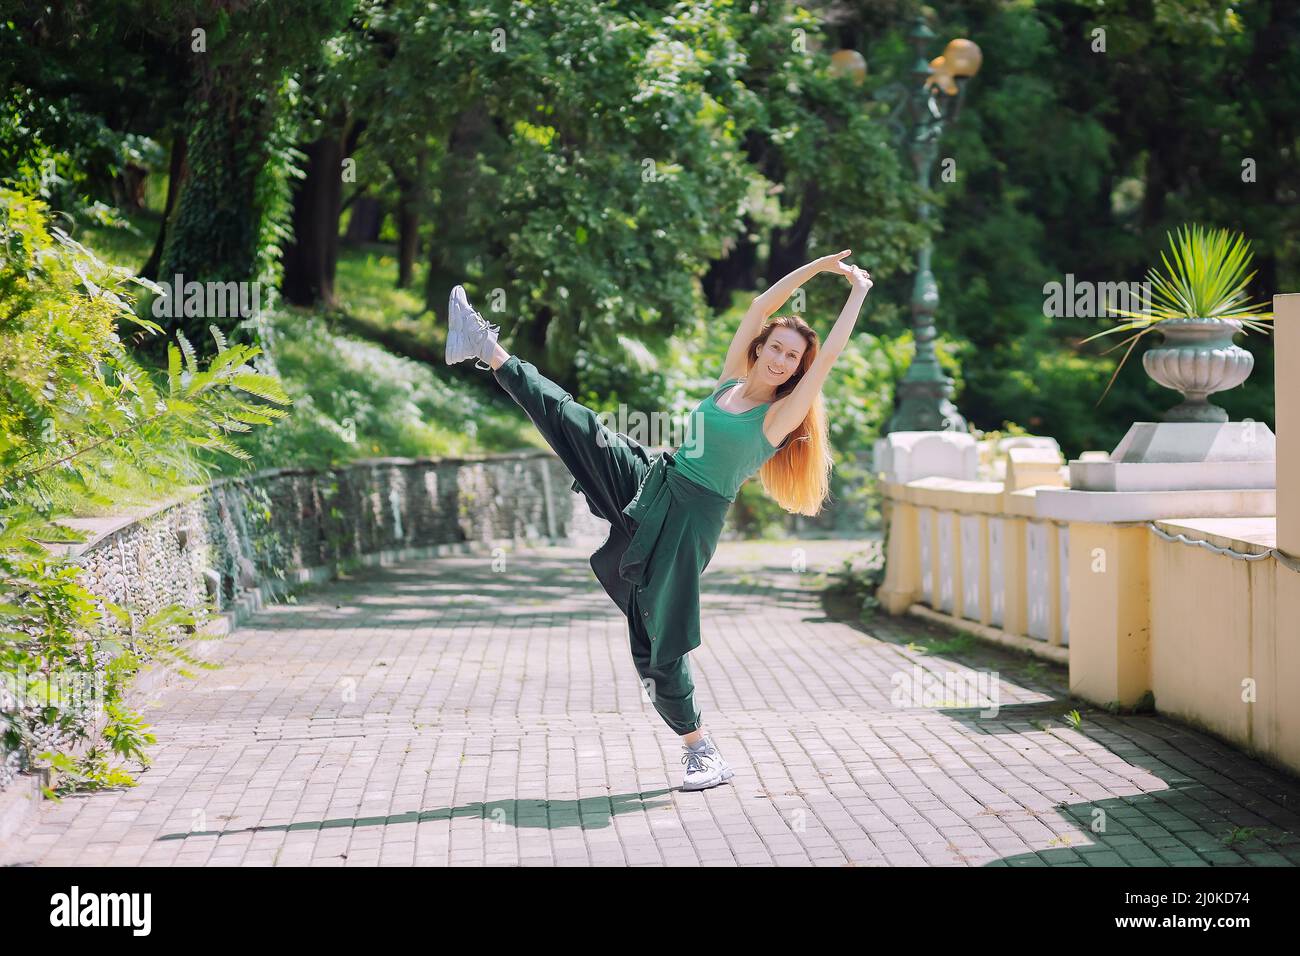 Smiling in a pose with her leg and hands held high in an alley in the park. Dance pose Stock Photo